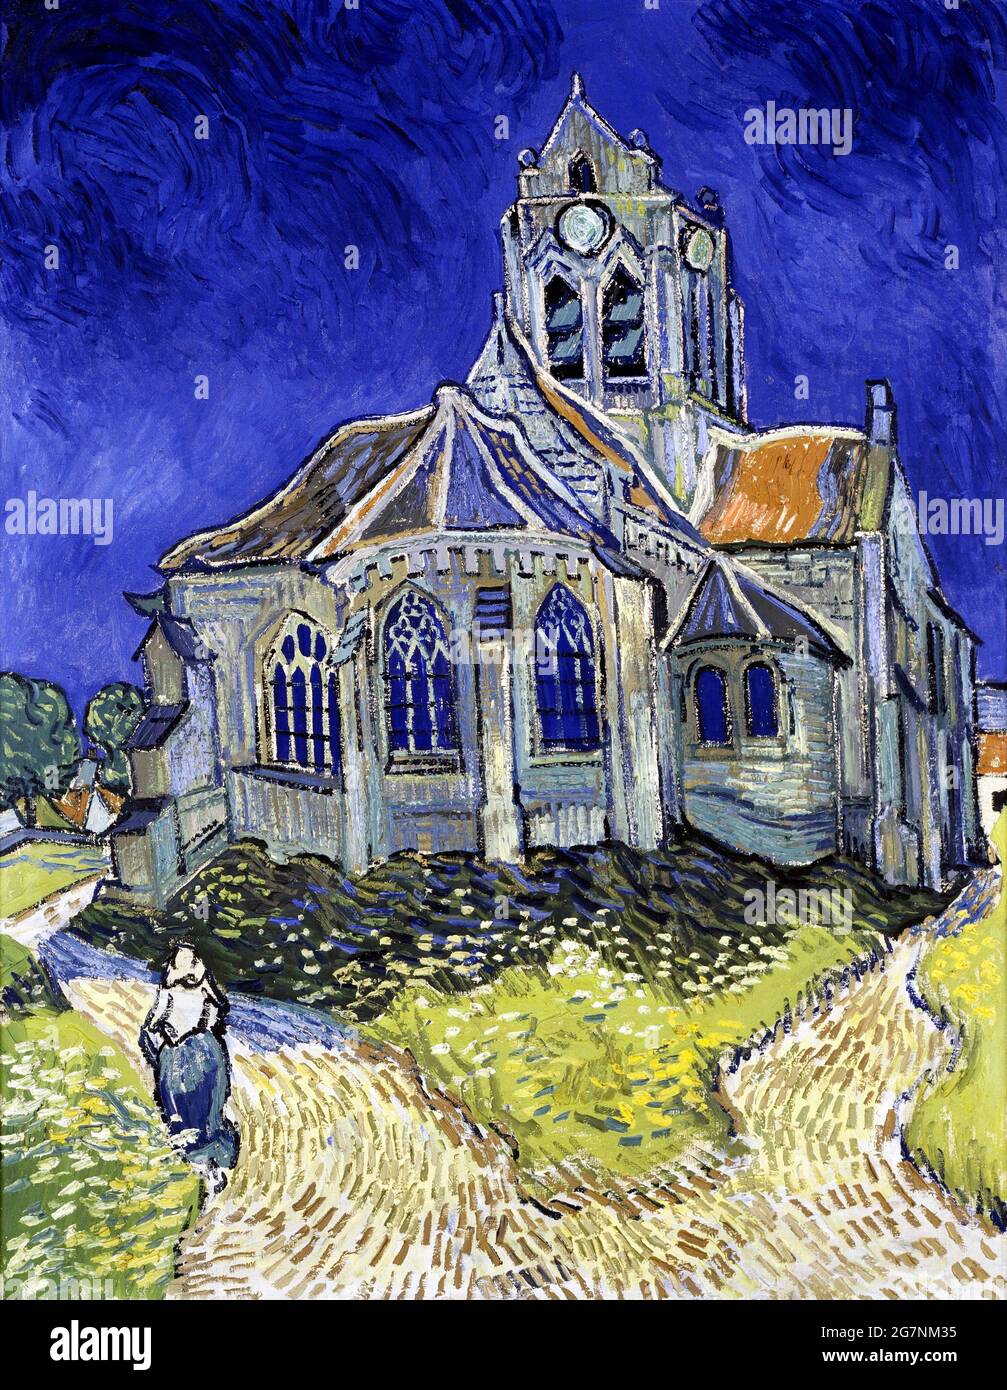 The Church in Auvers-sur-Oise, View from the Chevet by Vincent van Gogh (1853-1890), oil on canvas, 1890 Stock Photo